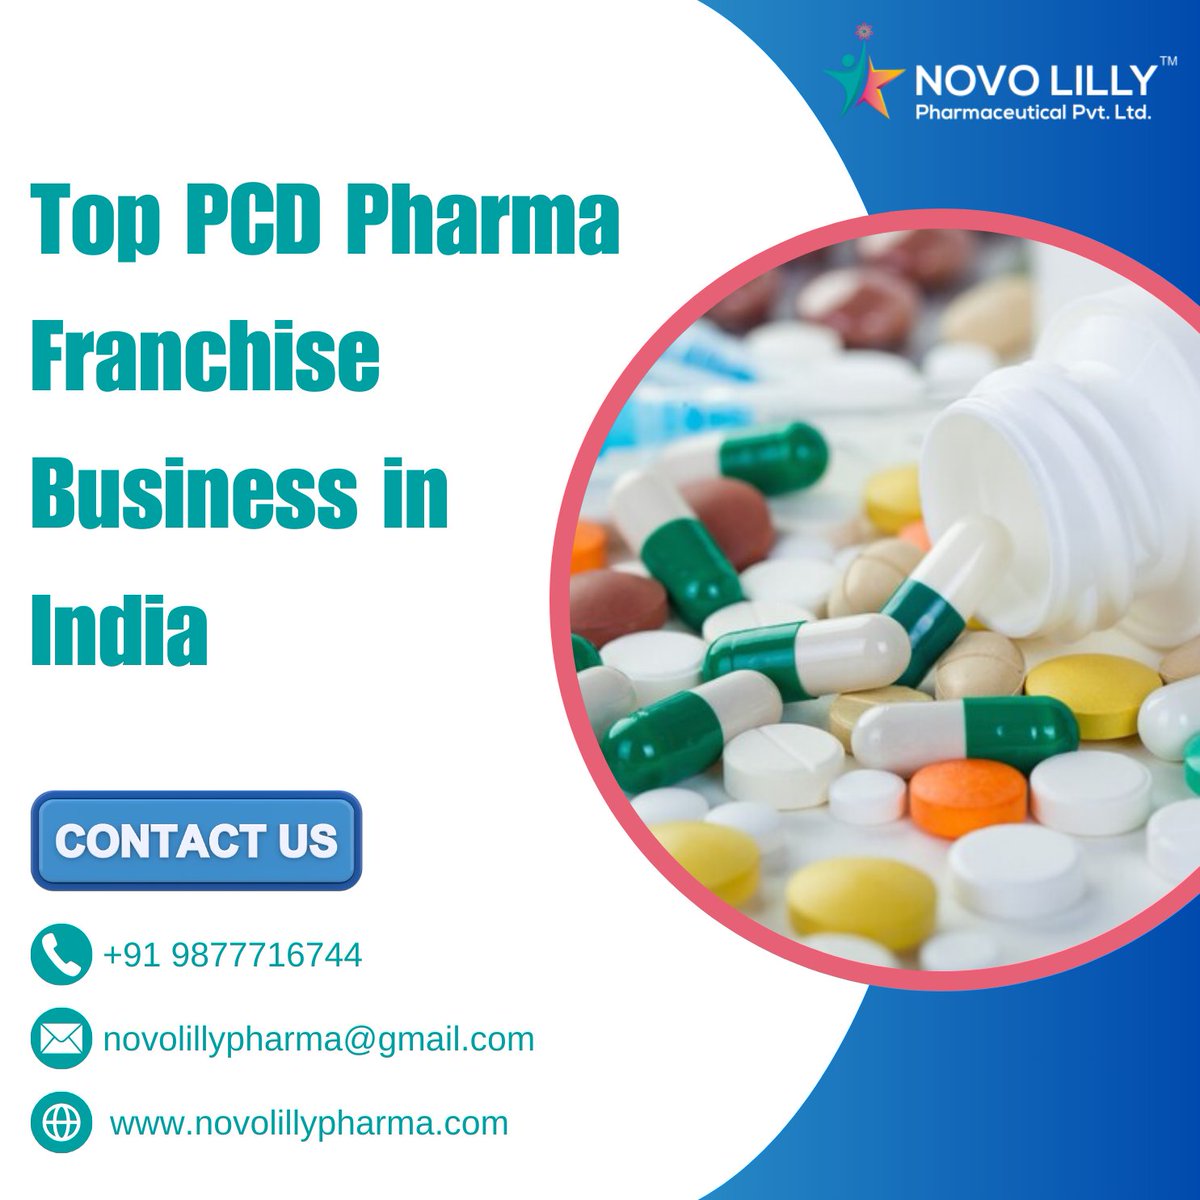 Join the Top PCD Pharma Franchise Business in India with Novolilly Pharmaceuticals!💊💉 Our commitment to quality, innovation, and customer satisfaction has made us a trusted name in the pharma industry. Invest in our diverse portfolio. Partner with us today!

#PCD #PCDPharma